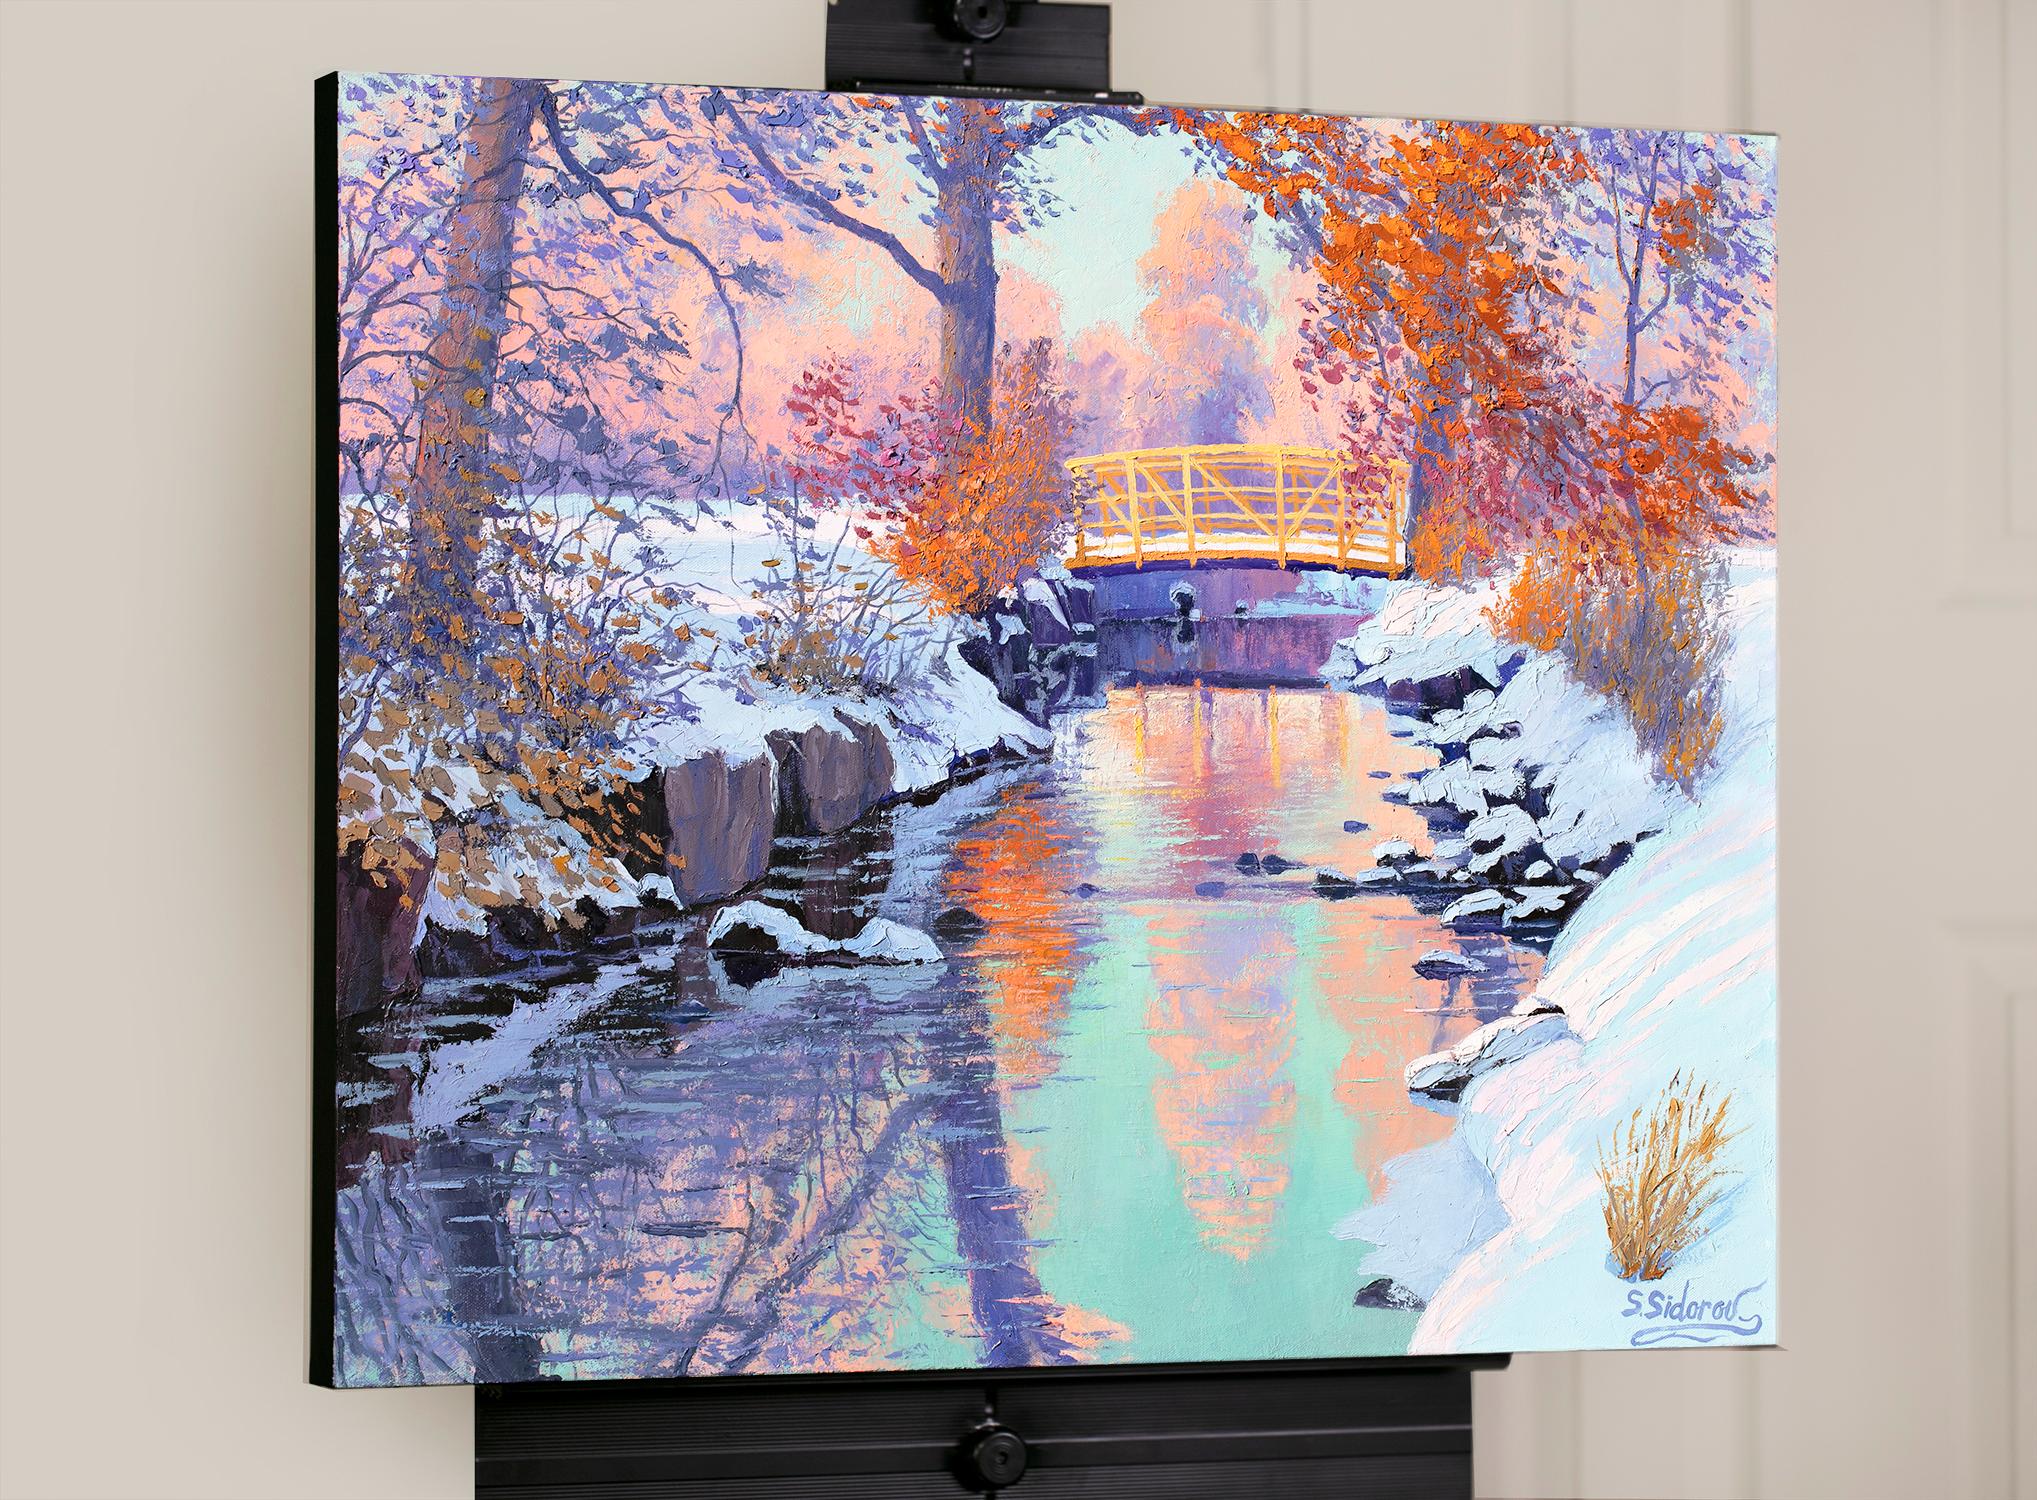 <p>Artist Comments<br>This joyful winter scene captures the gentle warmth of the sunset. The purity of the snow contrasts with vibrant hues reflecting on the water. Lilac light softly illuminates the surroundings, blending cool and warm tones